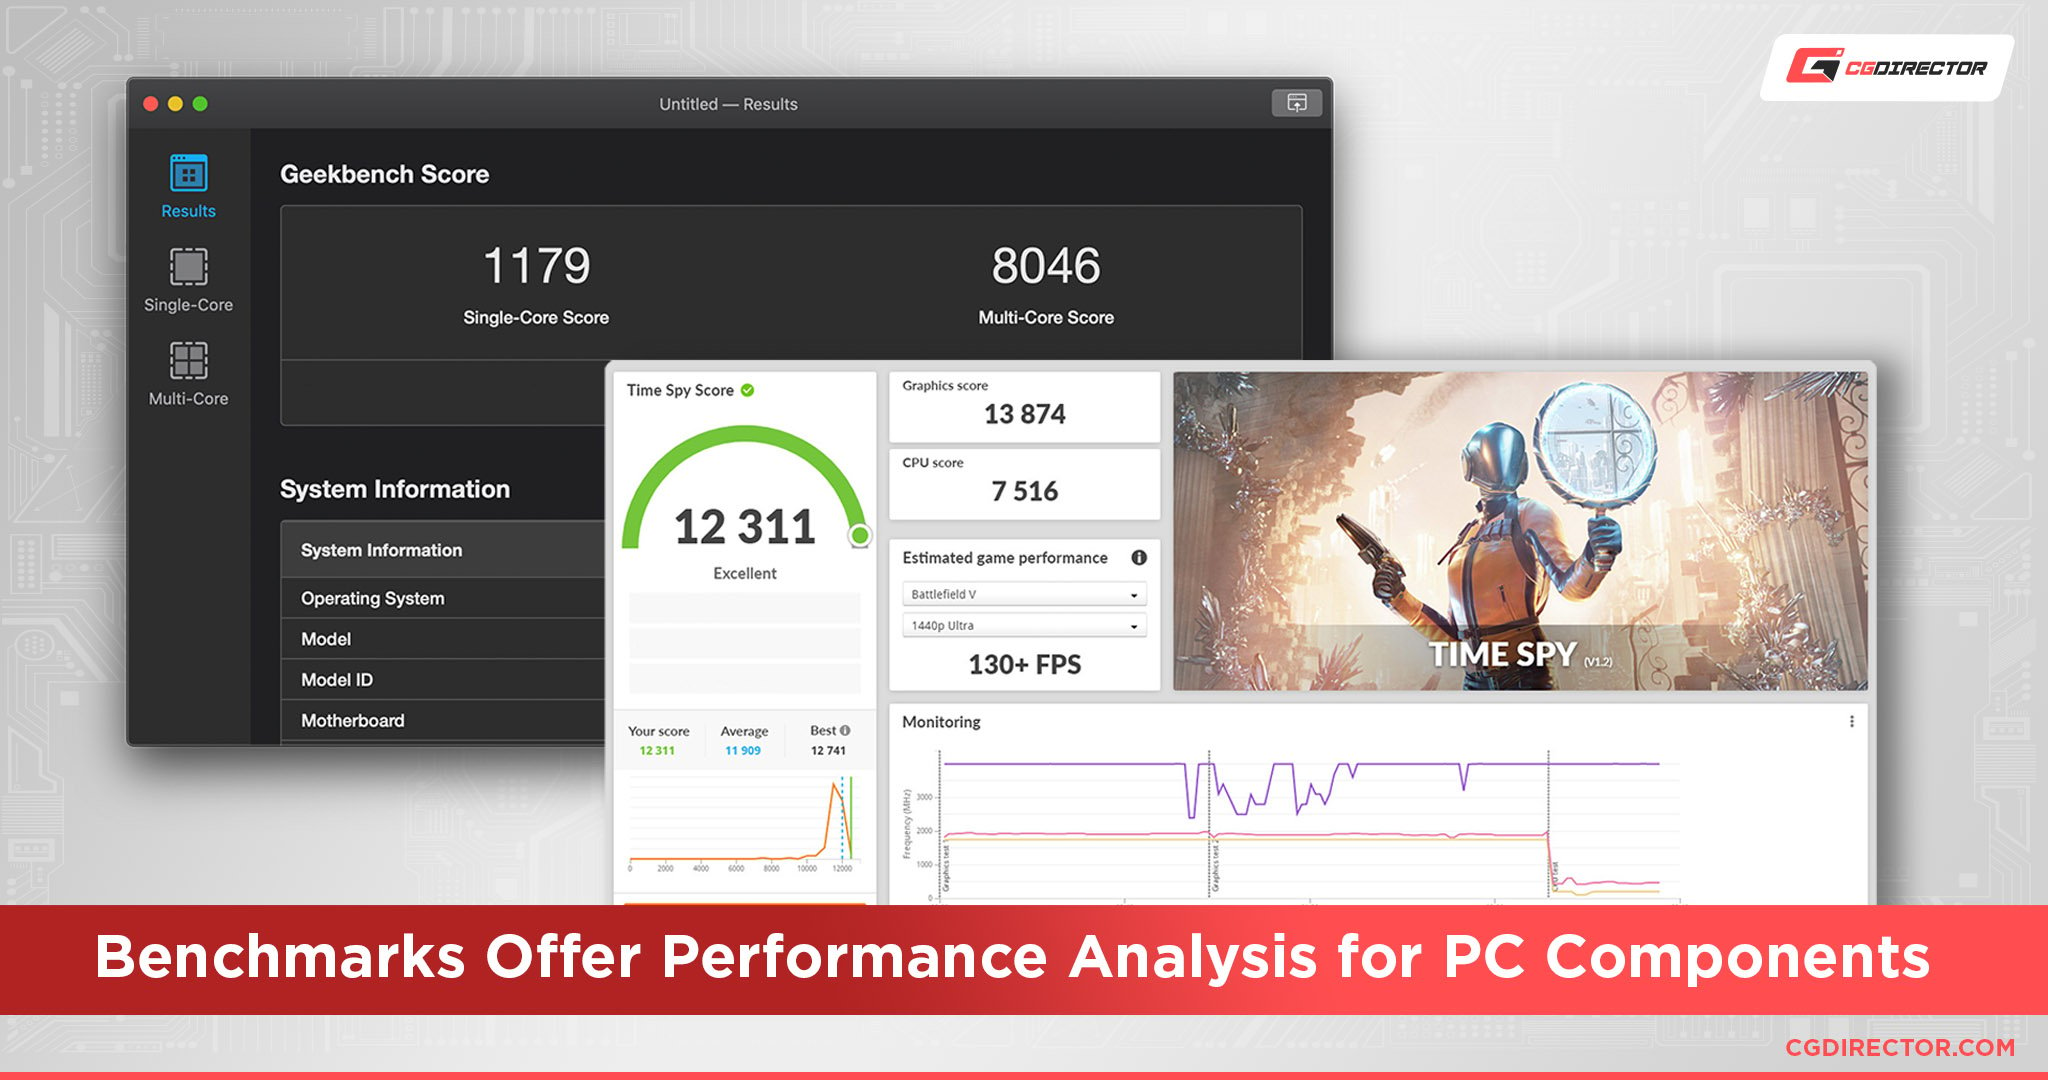 Benchmarks offer performance comparison